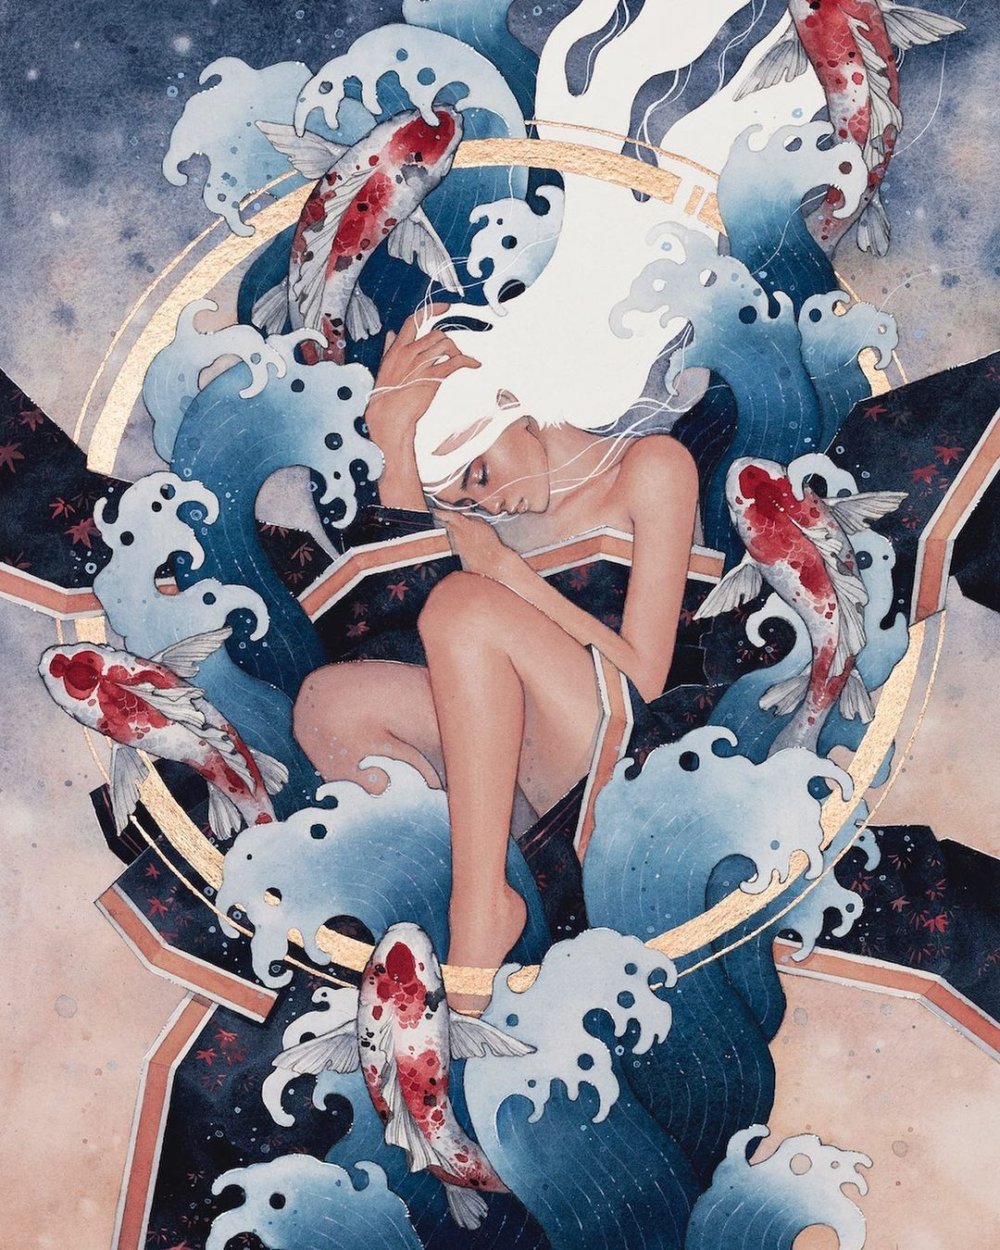 Whimsical And Ethereal Watercolors Of Women In Deep Moments Of Intimacy By Hieu Nguyen 13